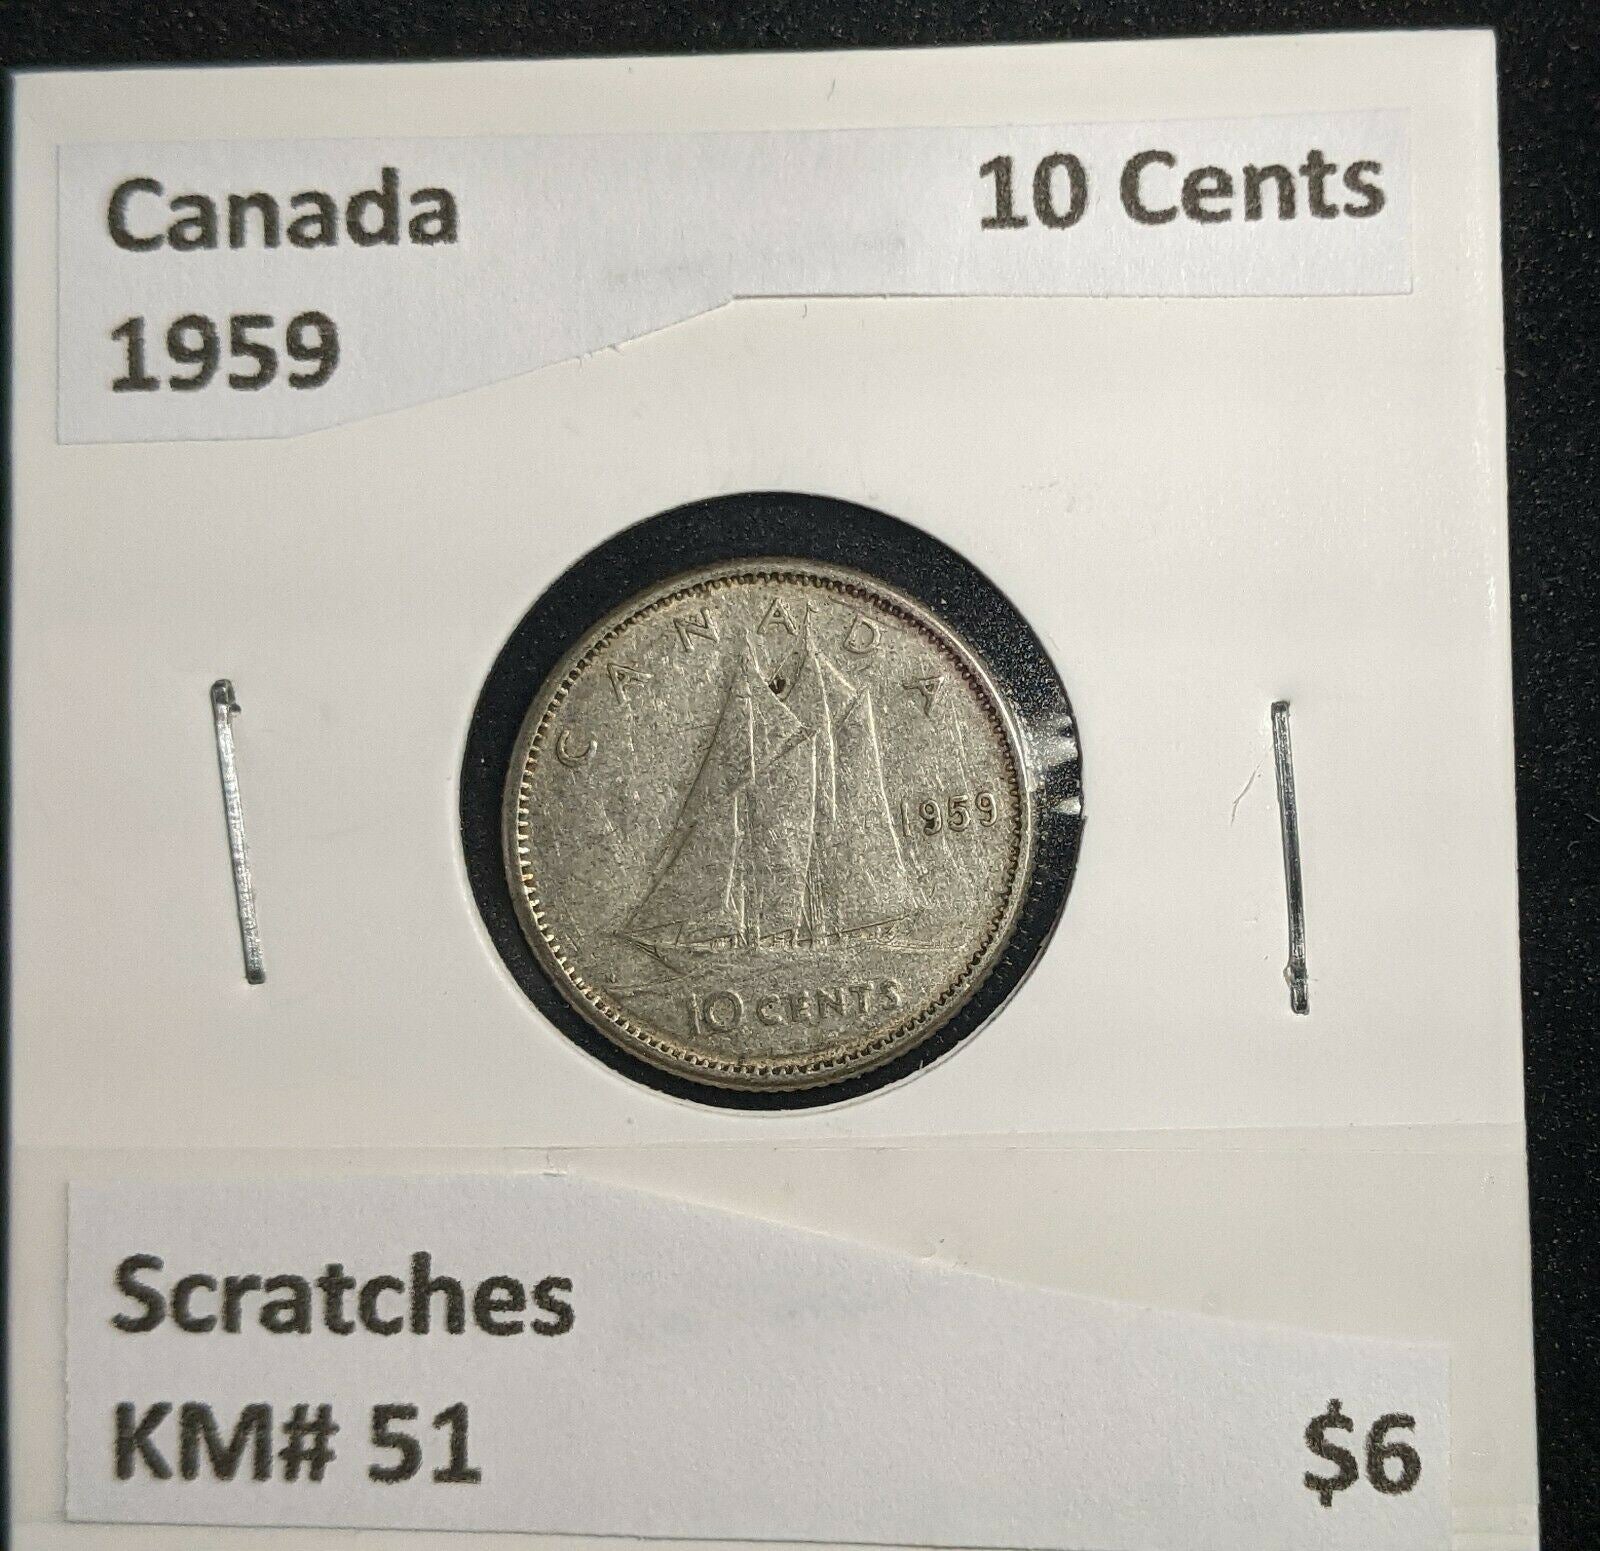 Canada 1959 10 Cents KM# 51 Scratches #088